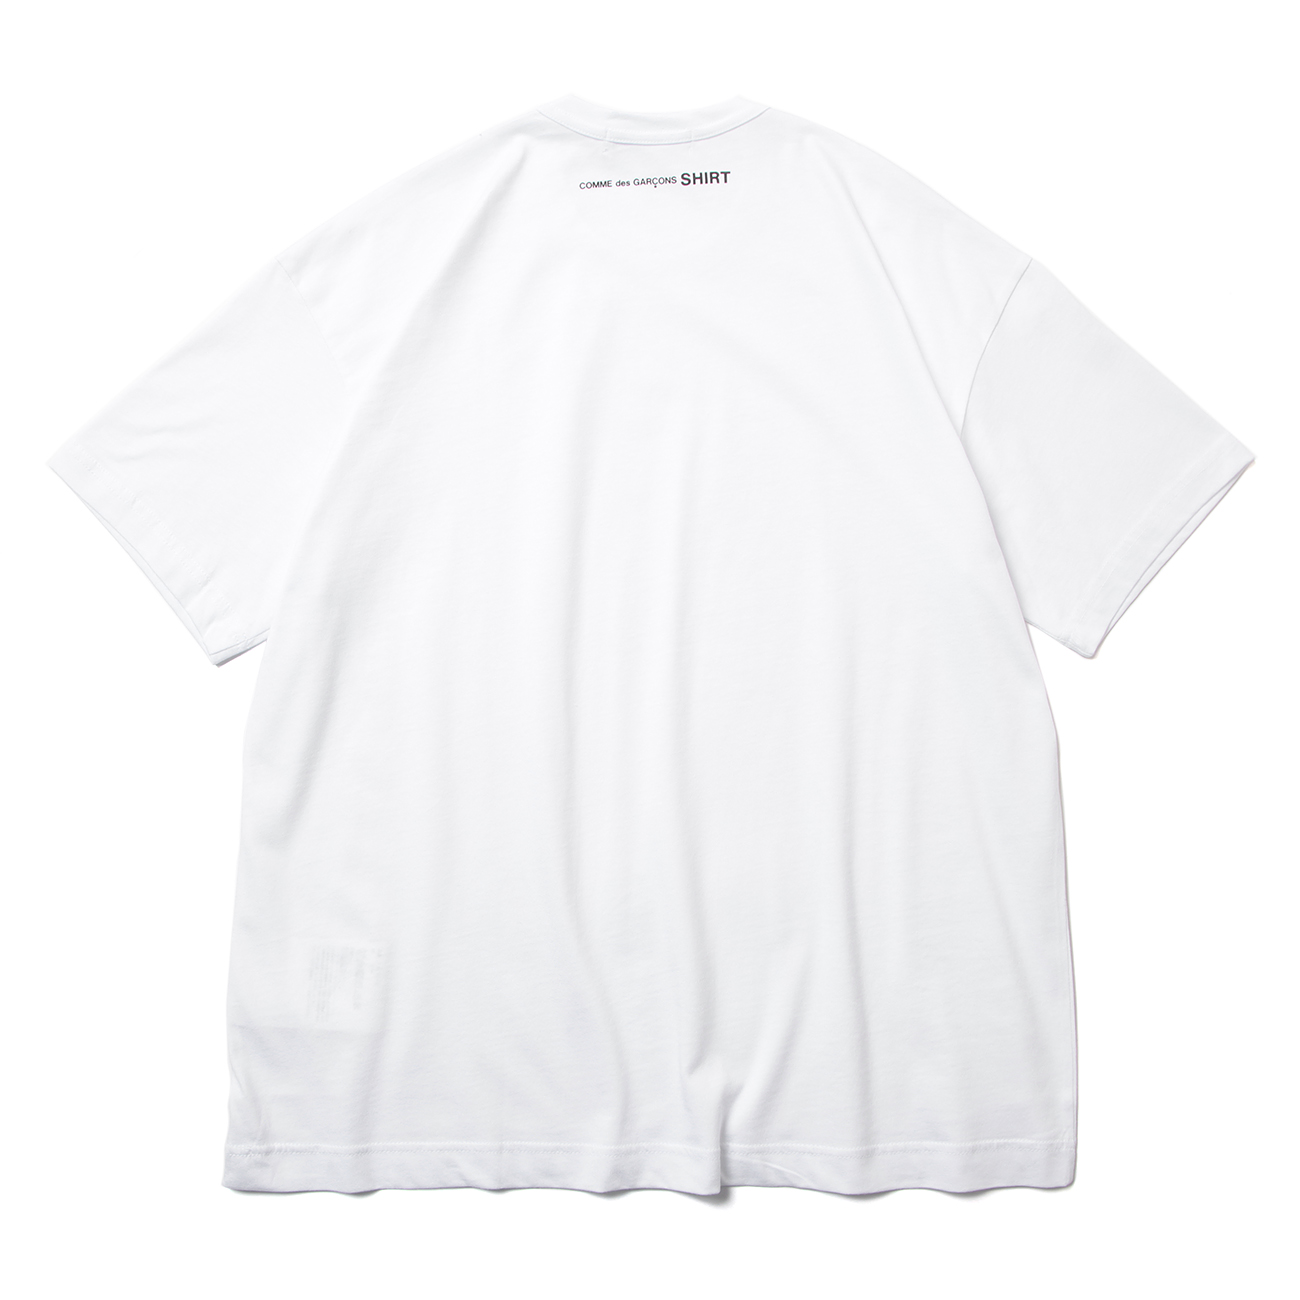 cotton jersey plain with CDG SHIRT logo on front - big T / Long Tshirt